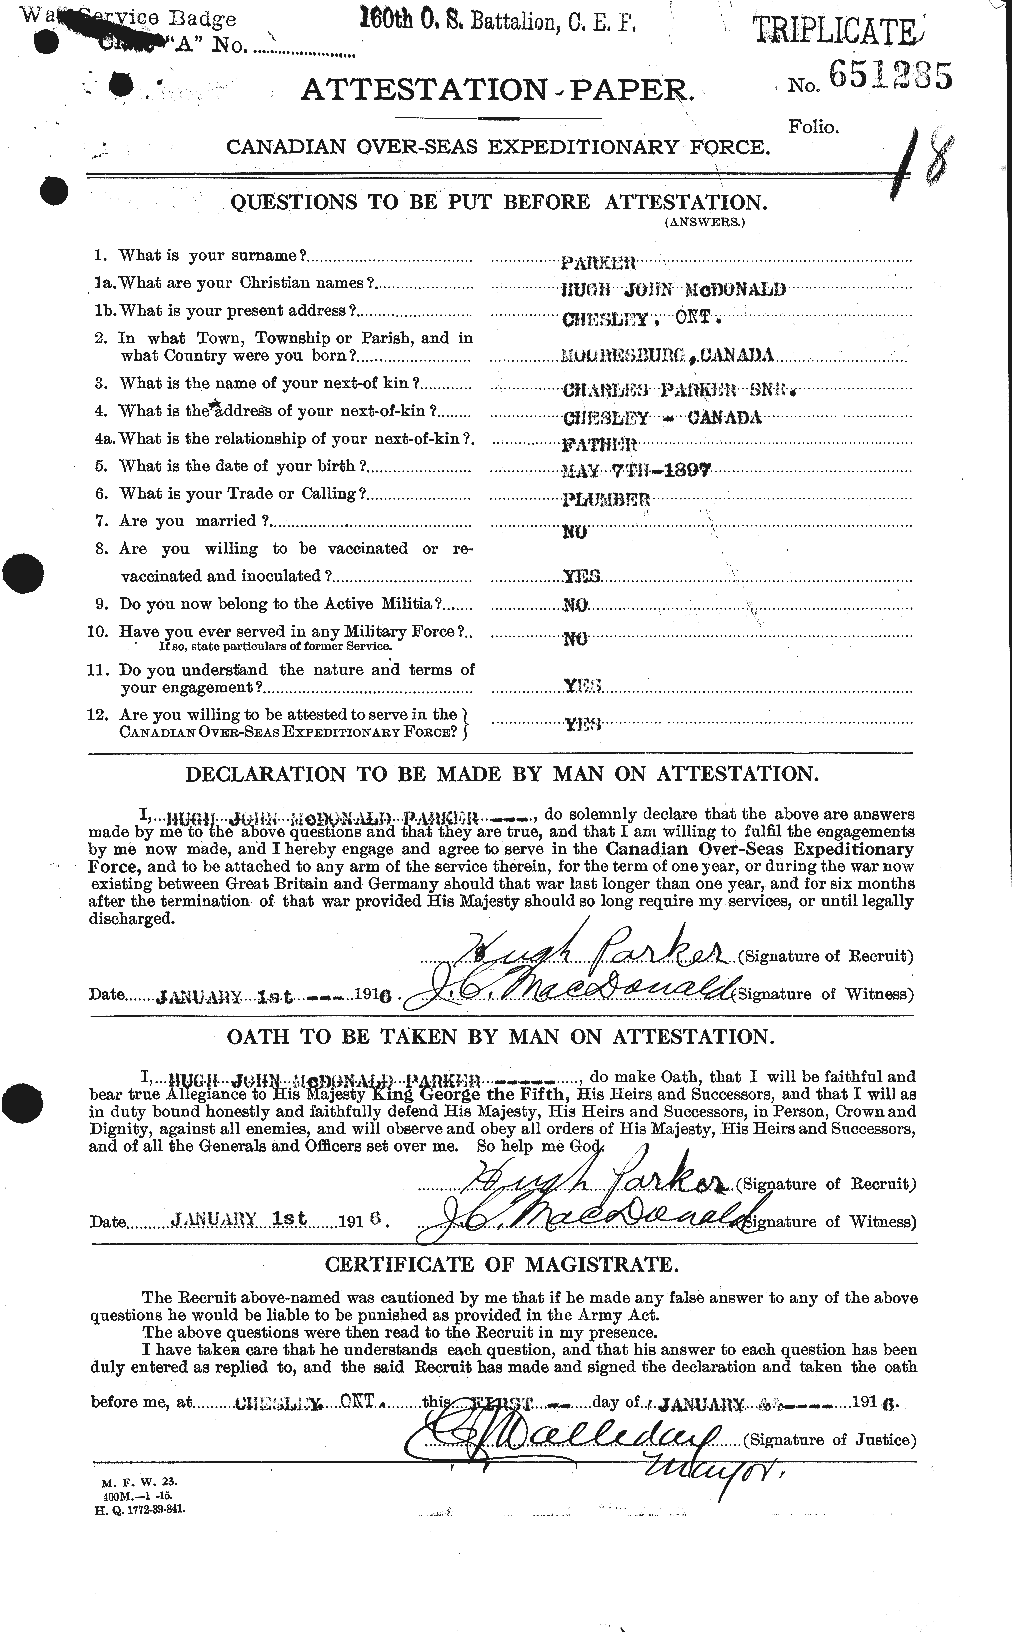 Personnel Records of the First World War - CEF 565399a